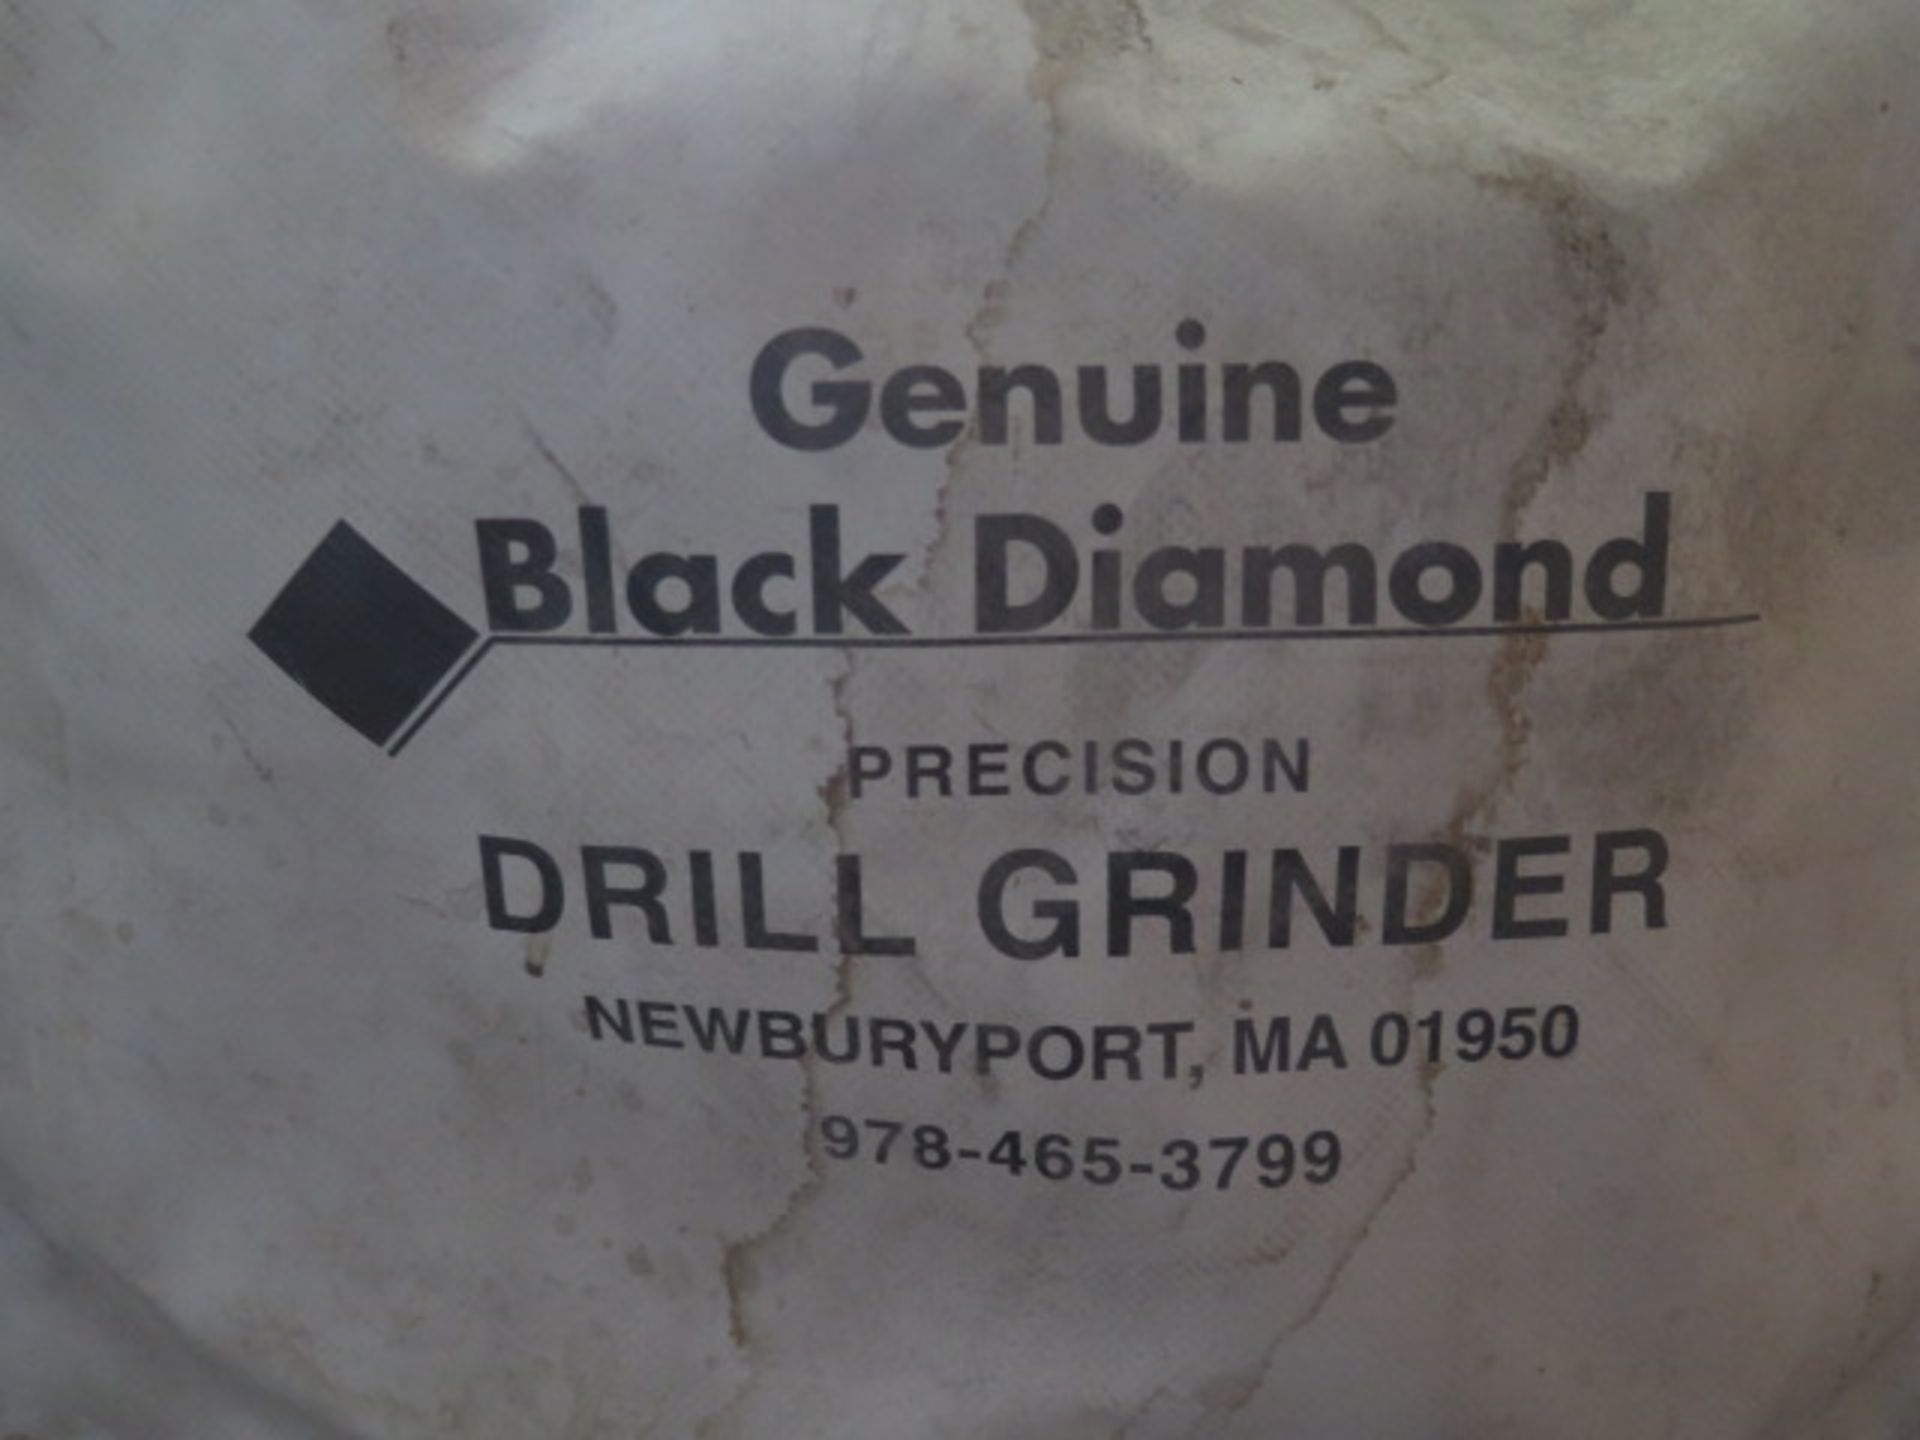 Black & Webster / Black Diamond mdl. 90A Precision Drill Sharpener s/n 28309 w/ Collet SOLD AS IS - Image 11 of 11